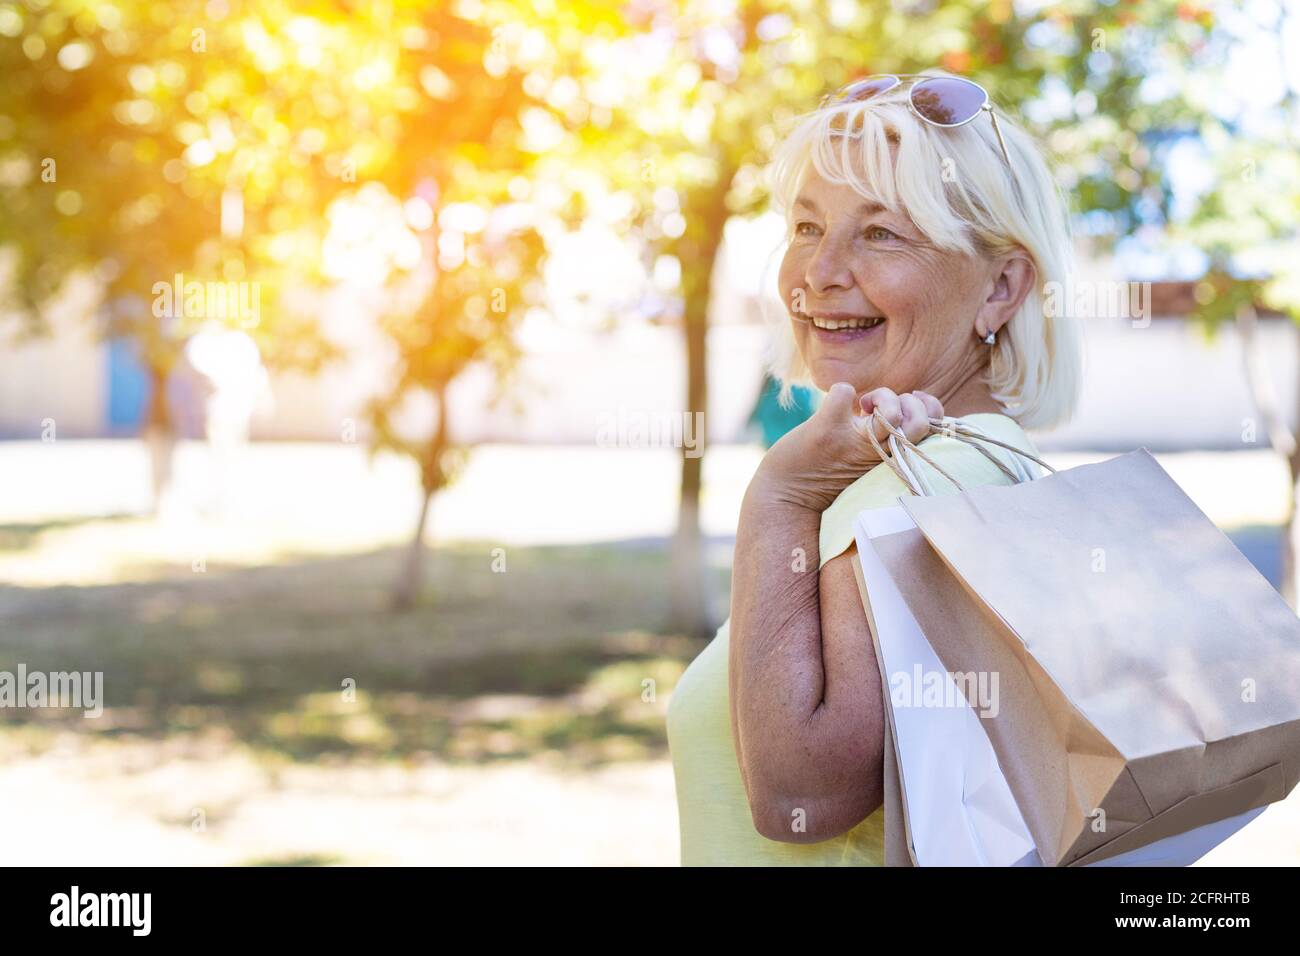 Beauty blonde smiling girl in sunglasses with shopping bags in the park on a sunny day. Shopping concept Stock Photo